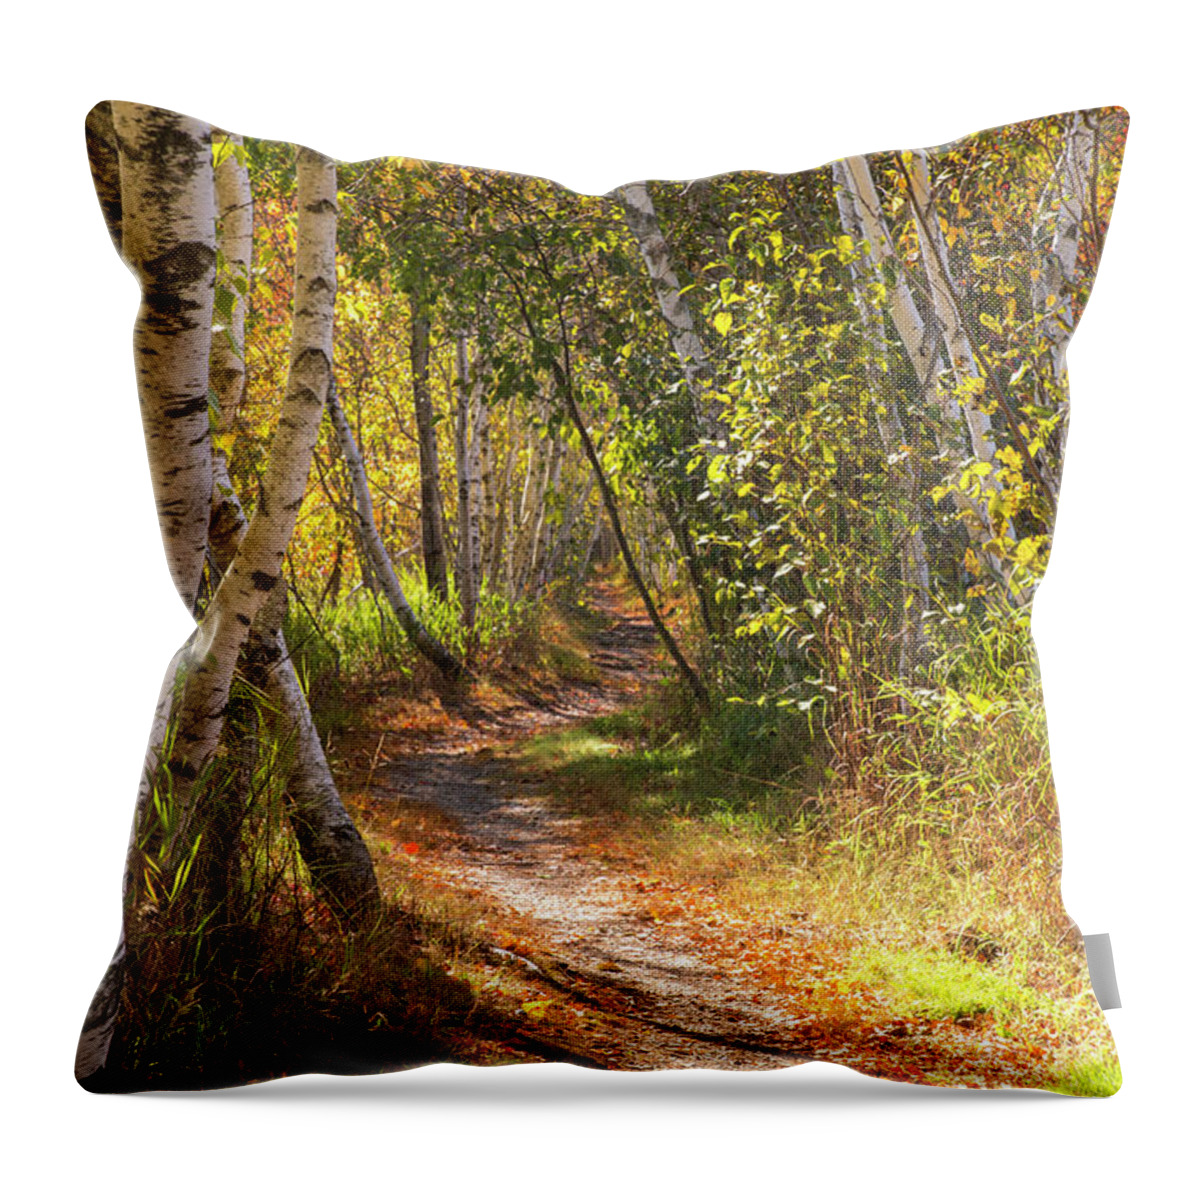 Acadia Throw Pillow featuring the photograph Acadia Hemlock Trail Birches by White Mountain Images